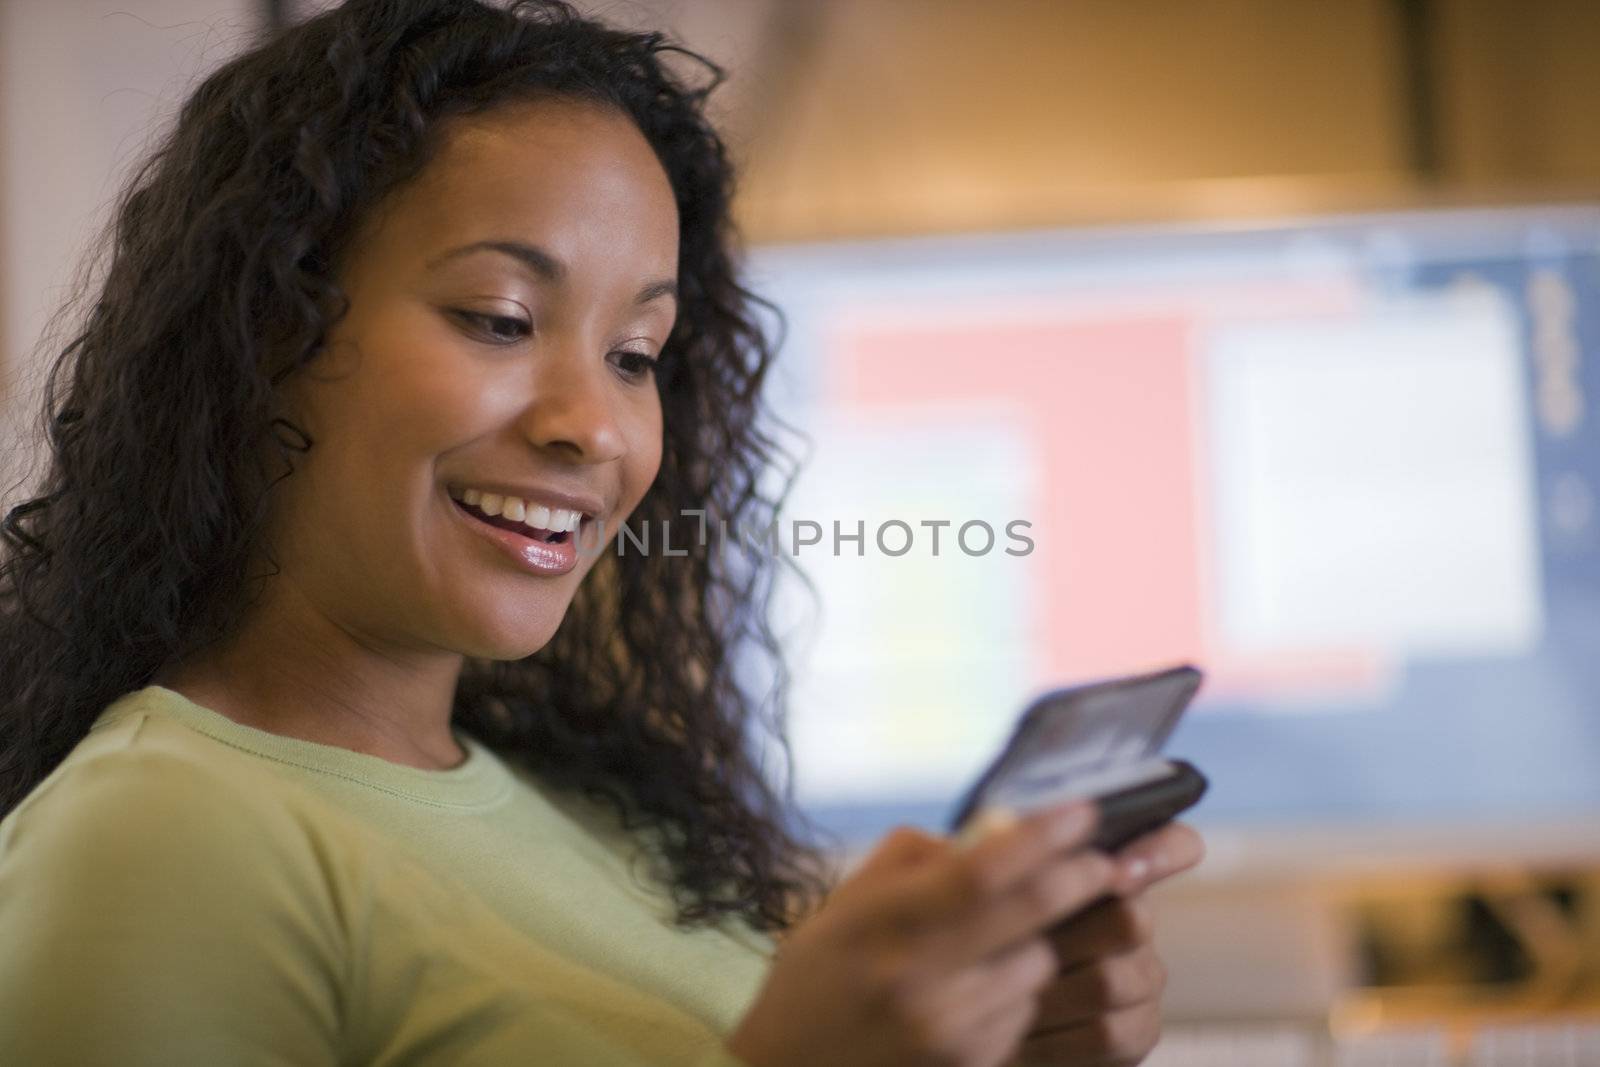 Smiling young African American woman texting on cell phone with computer monitor in the background on desk
